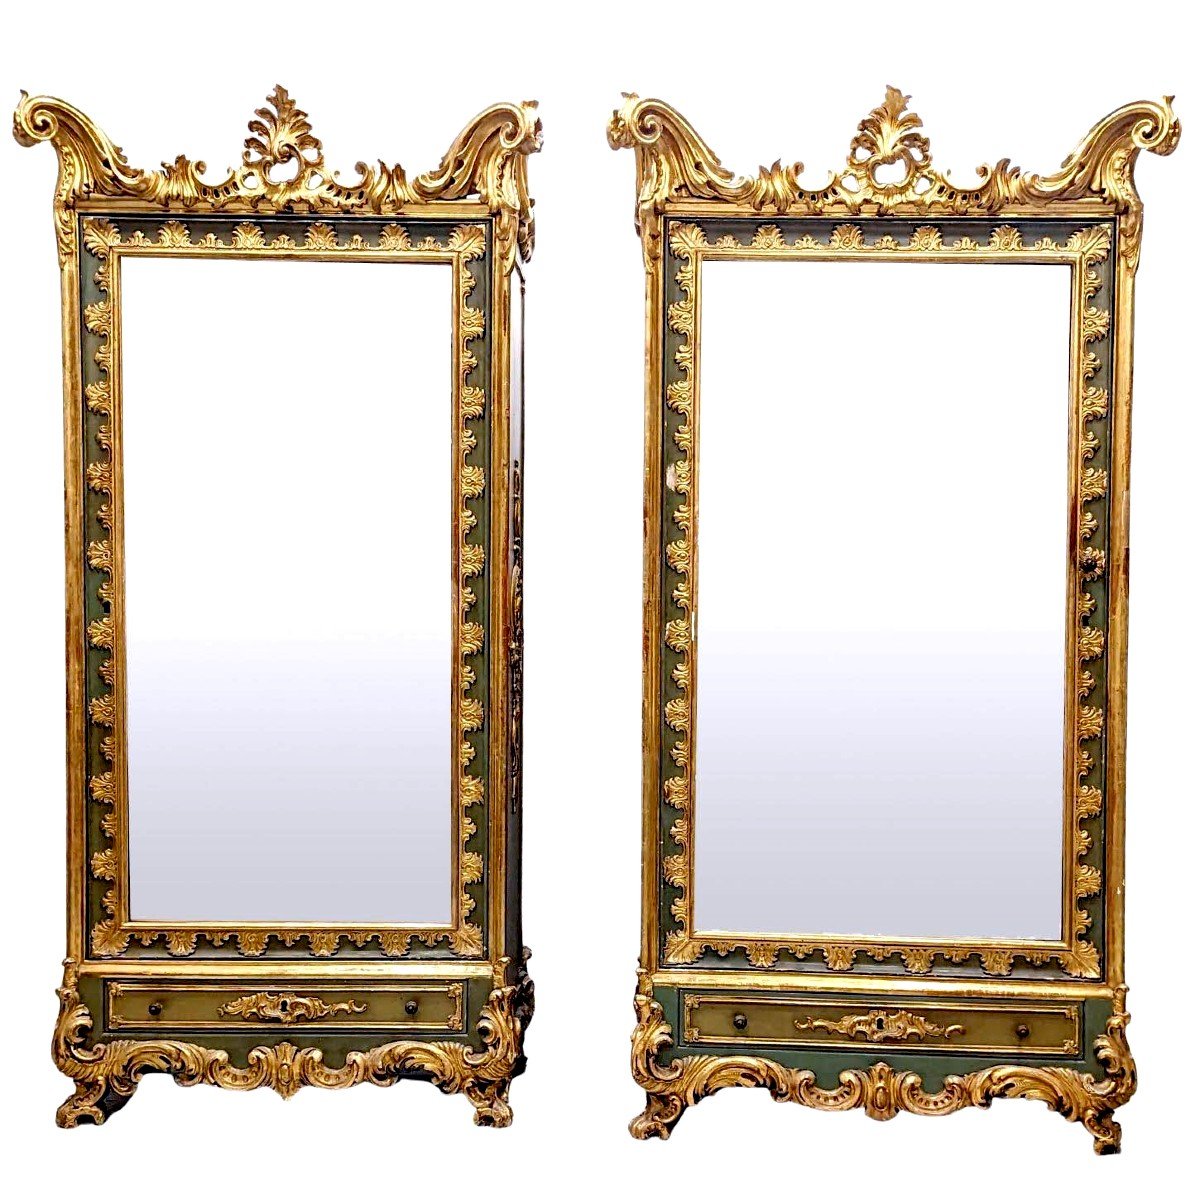 Pair Of Golden Lacquered Turinese Cabinets From The Beginning Of The Nineteenth Century.